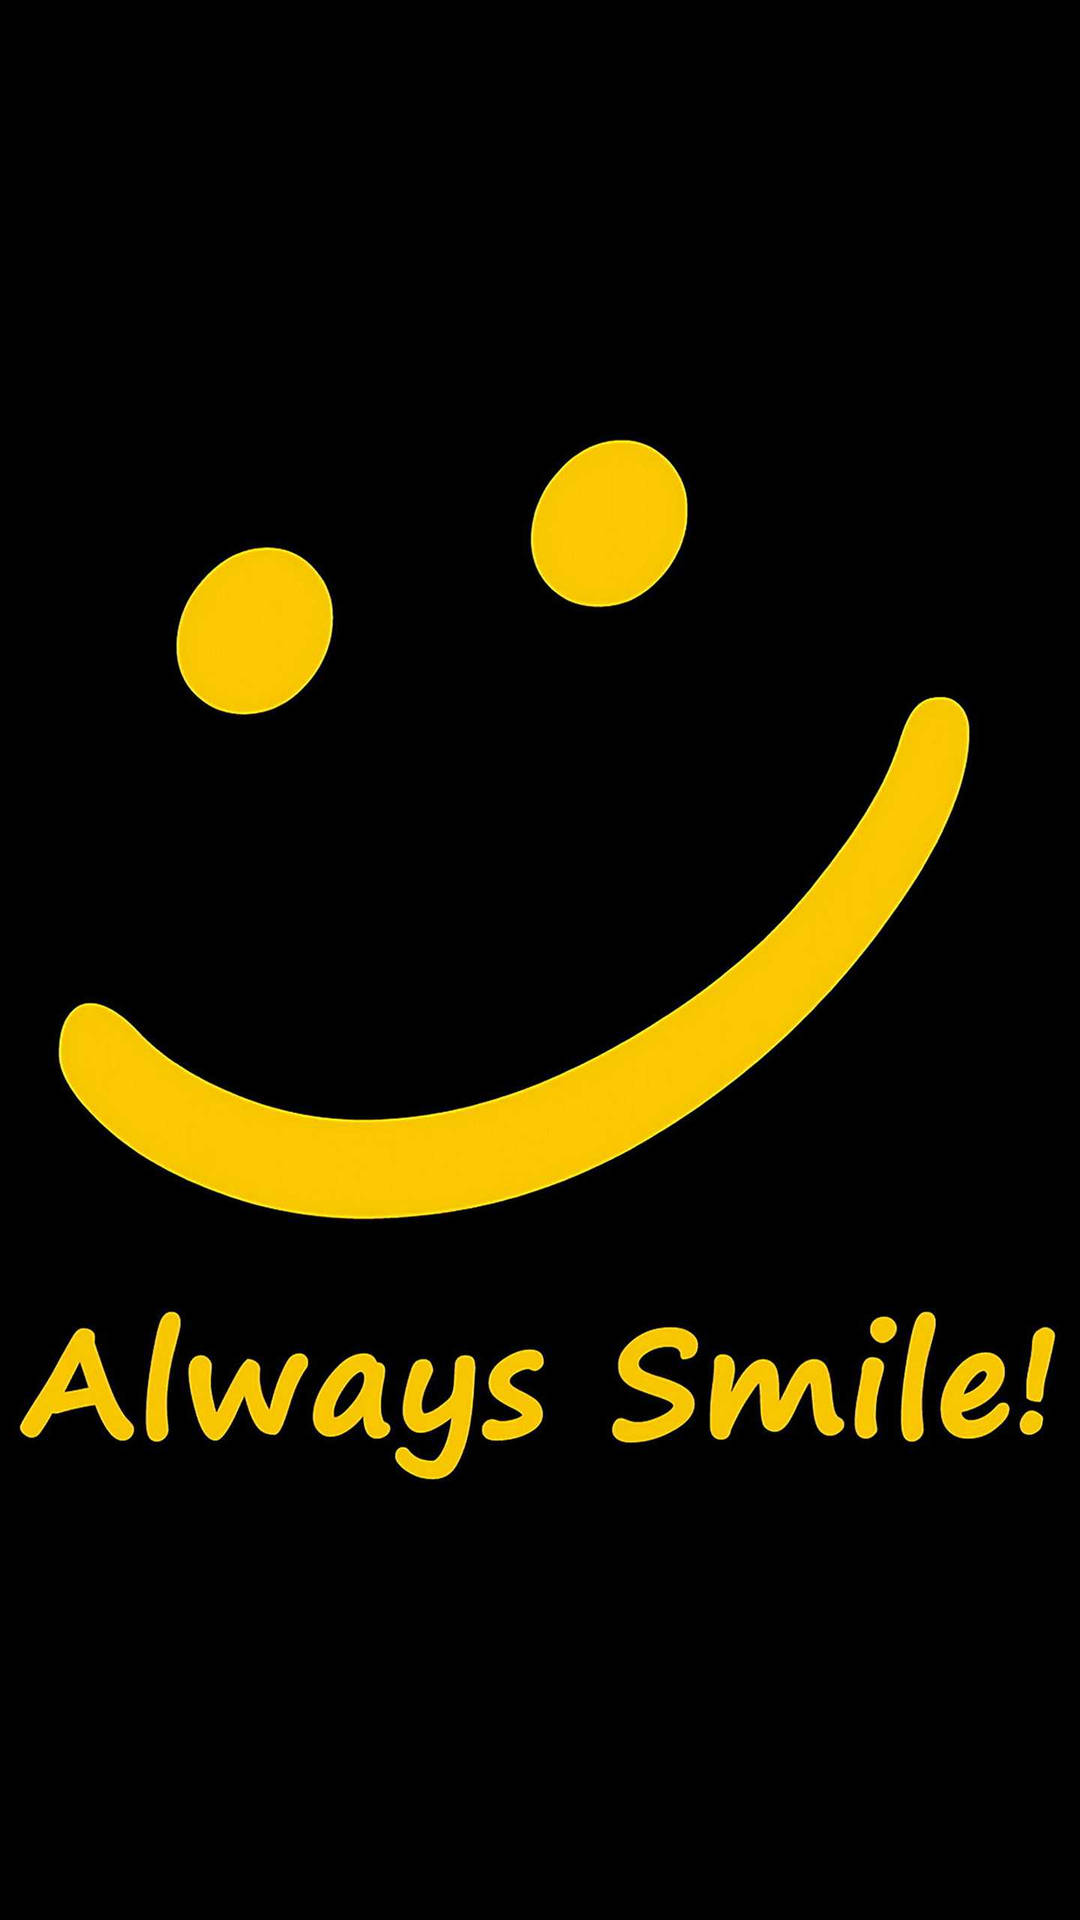 Smiley Face Always Smile Background